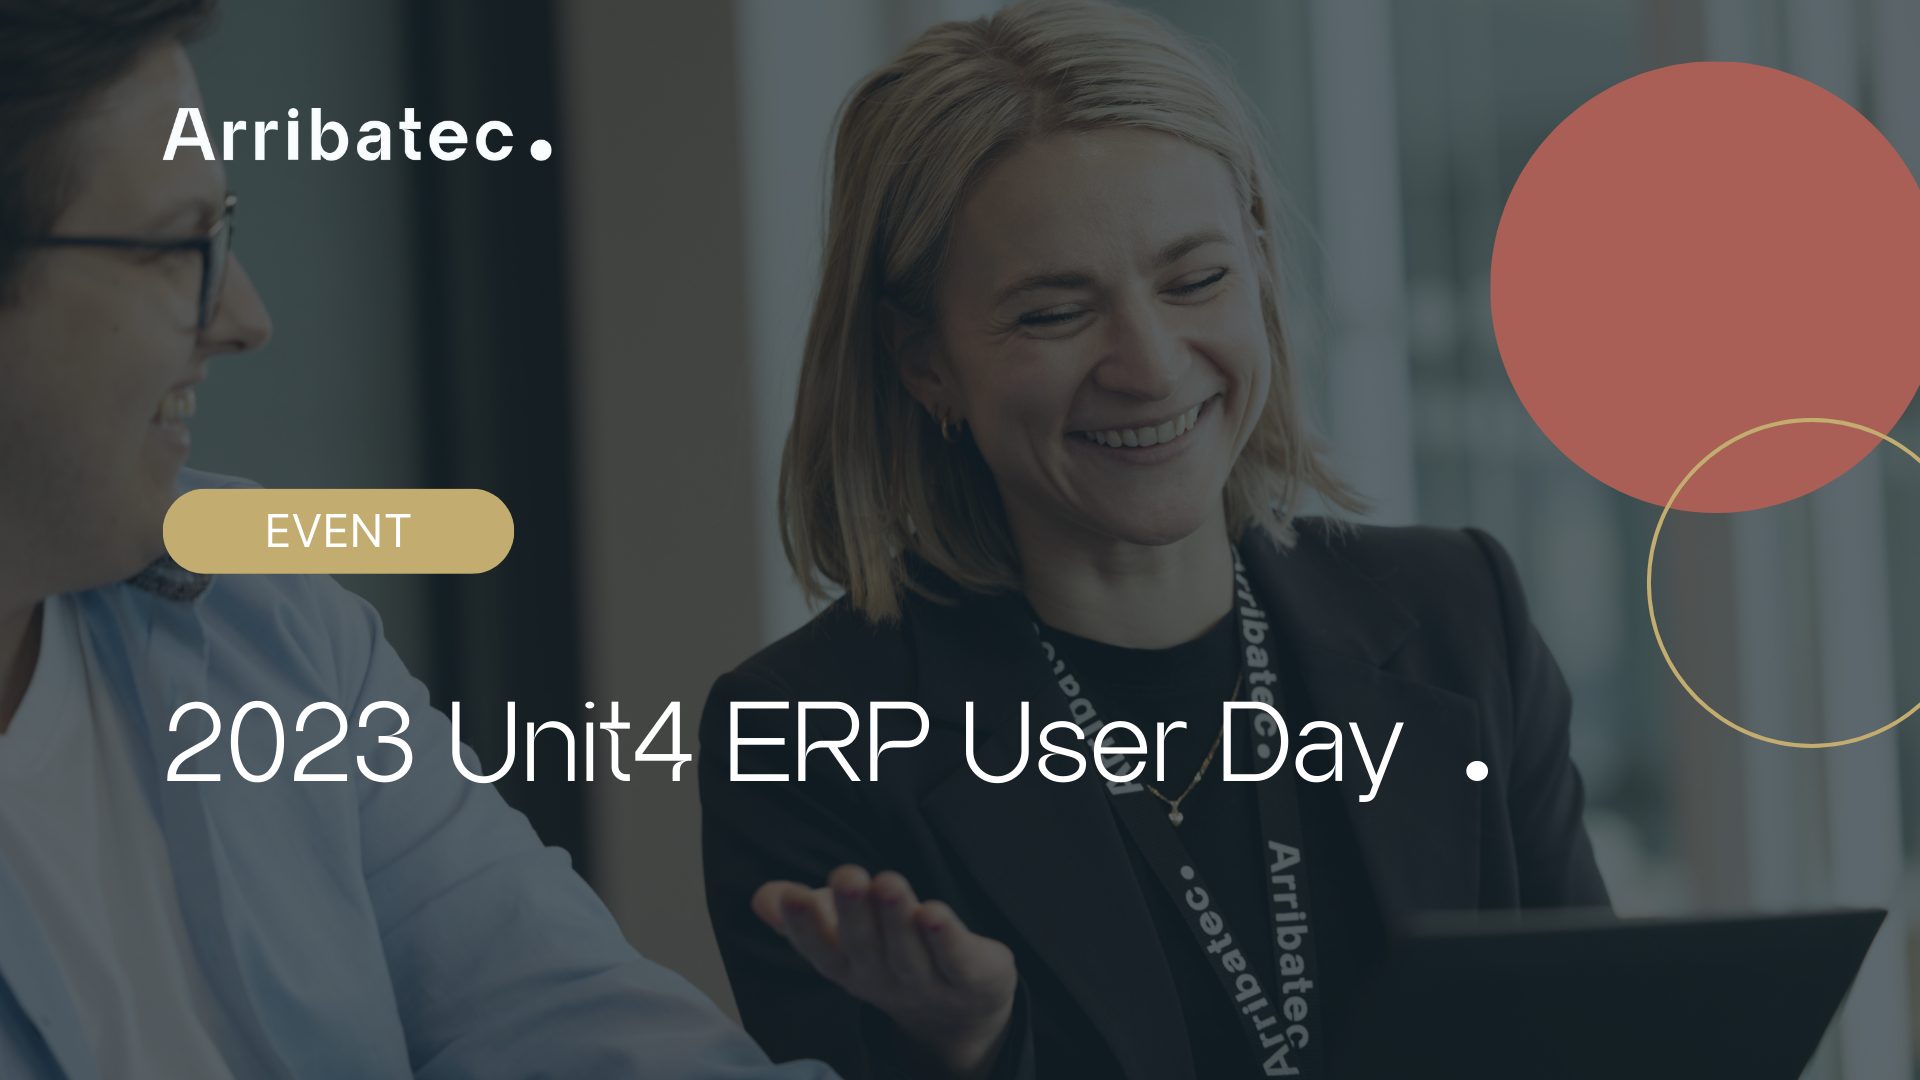 Thank you for securing your place at our Unit4 ERP User Day Event